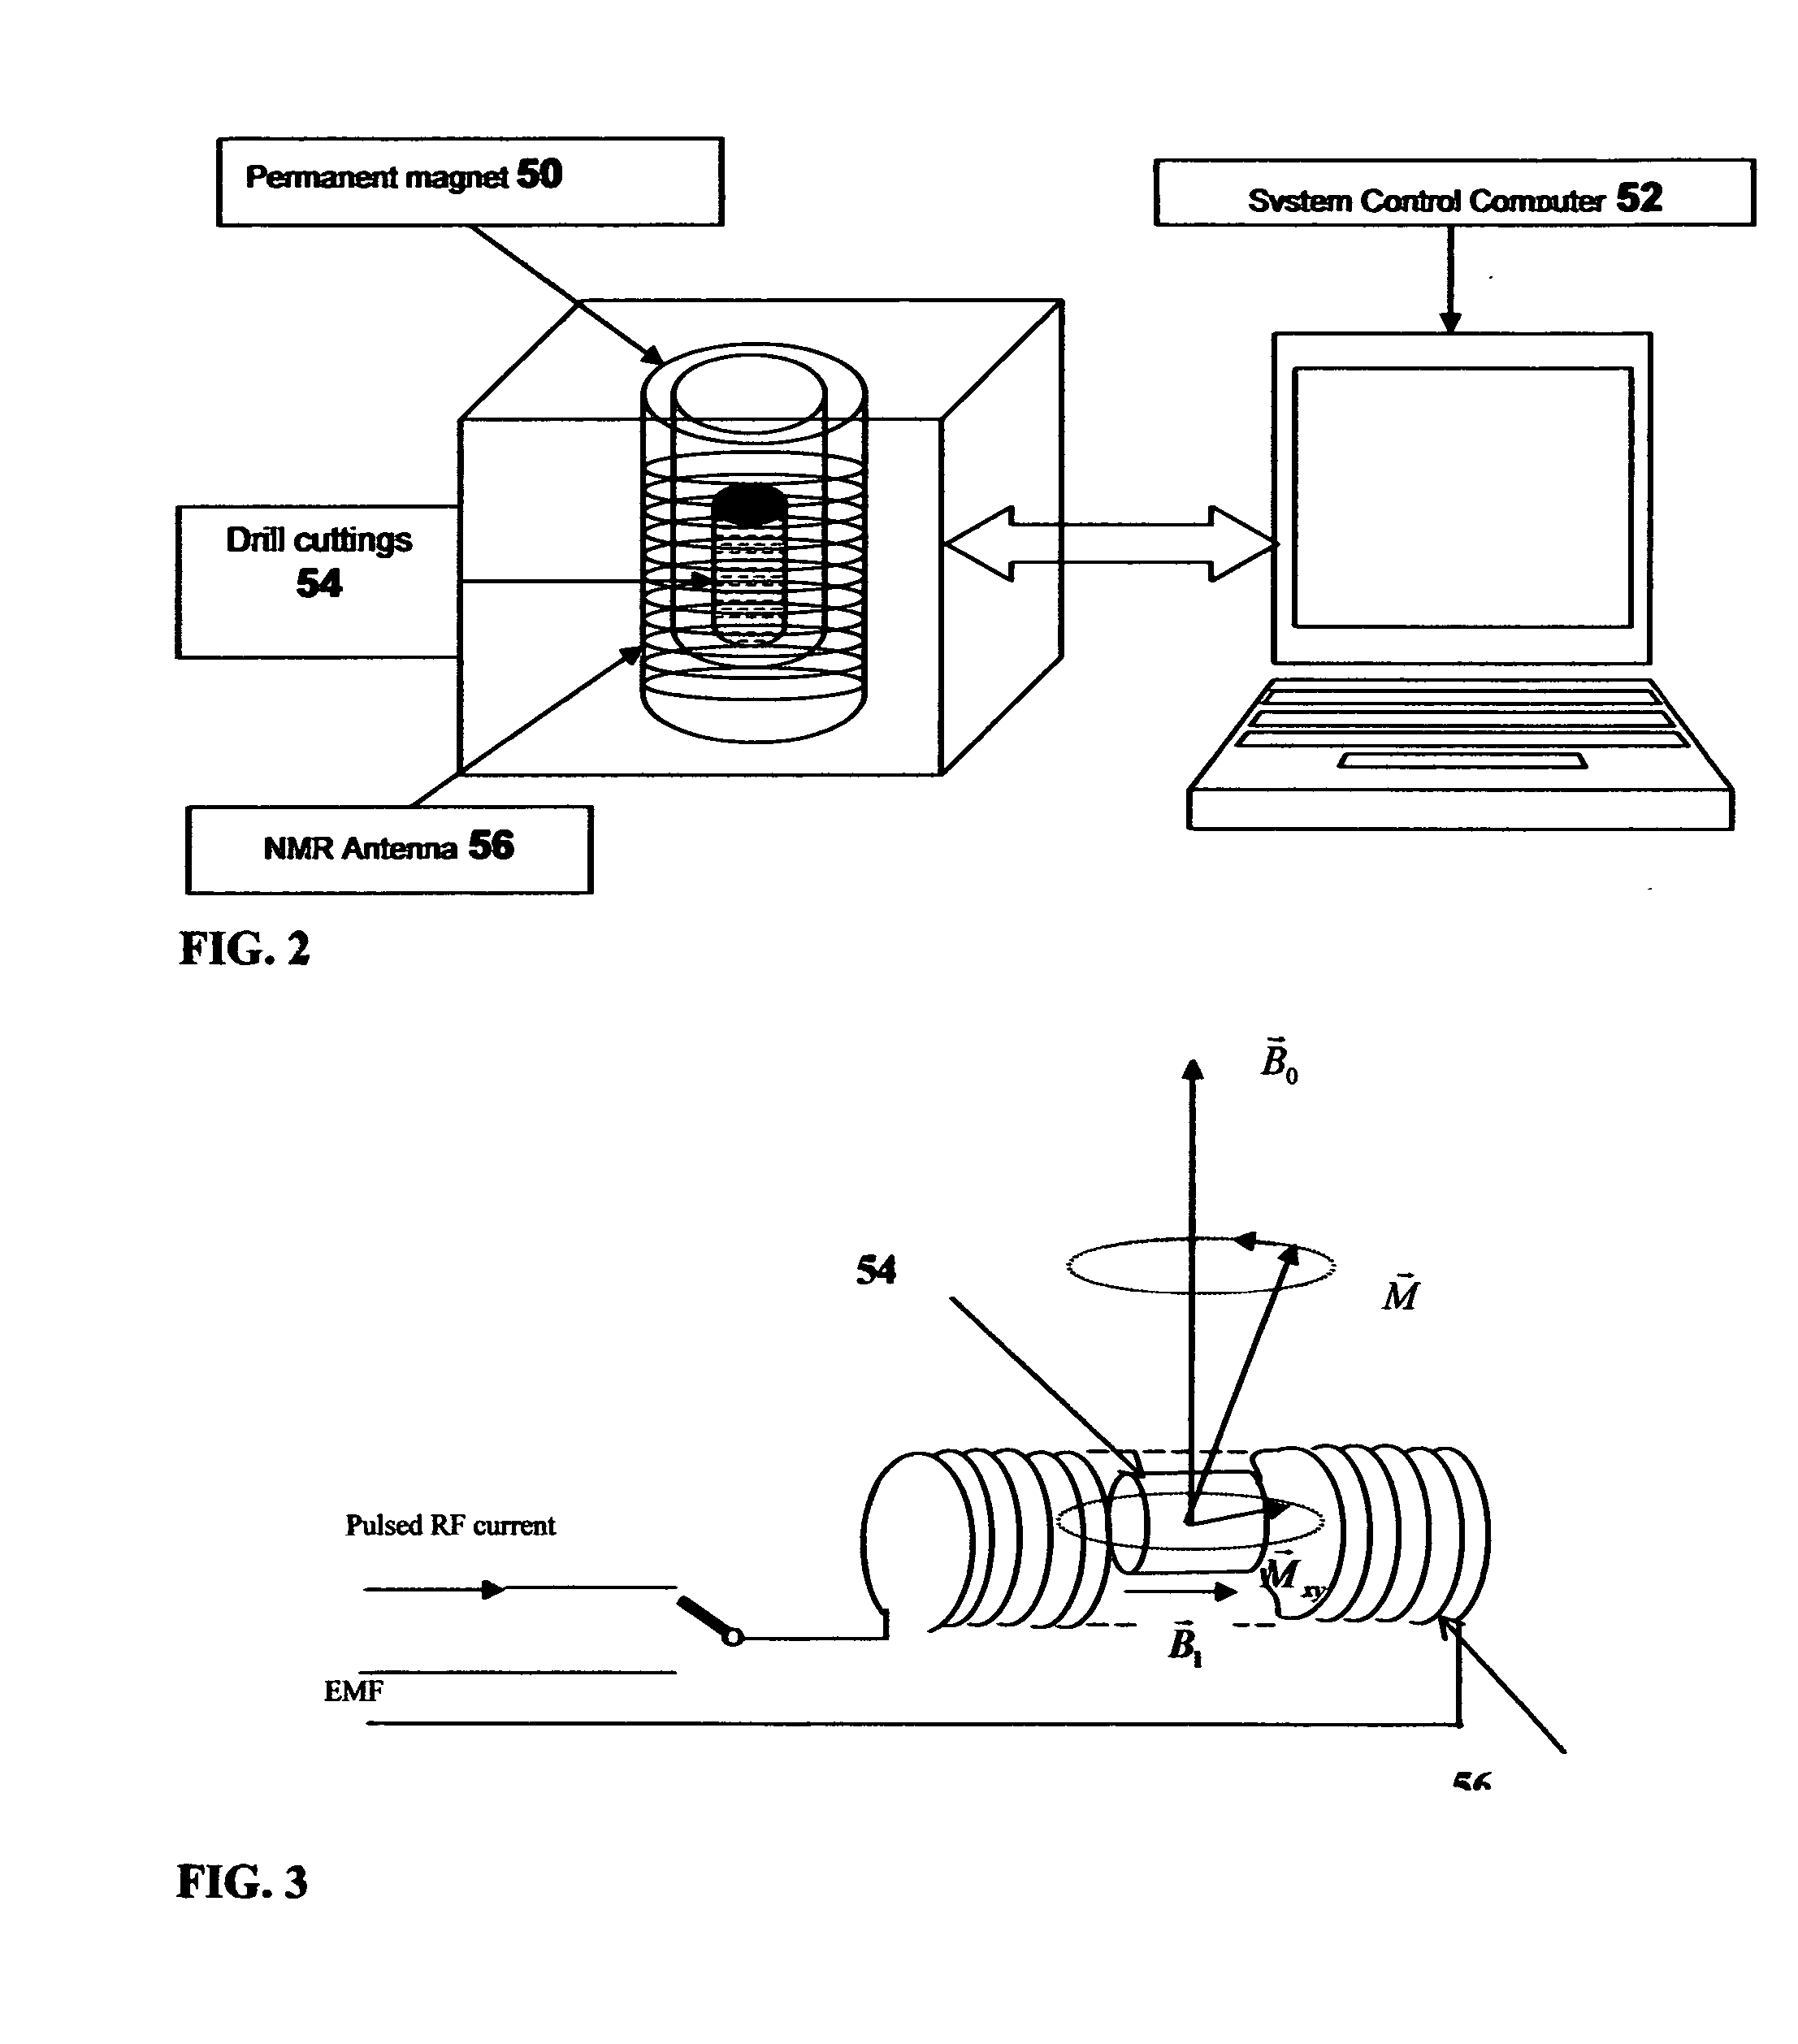 Method for analyzing drill cuttings using nuclear magnetic resonance techniques